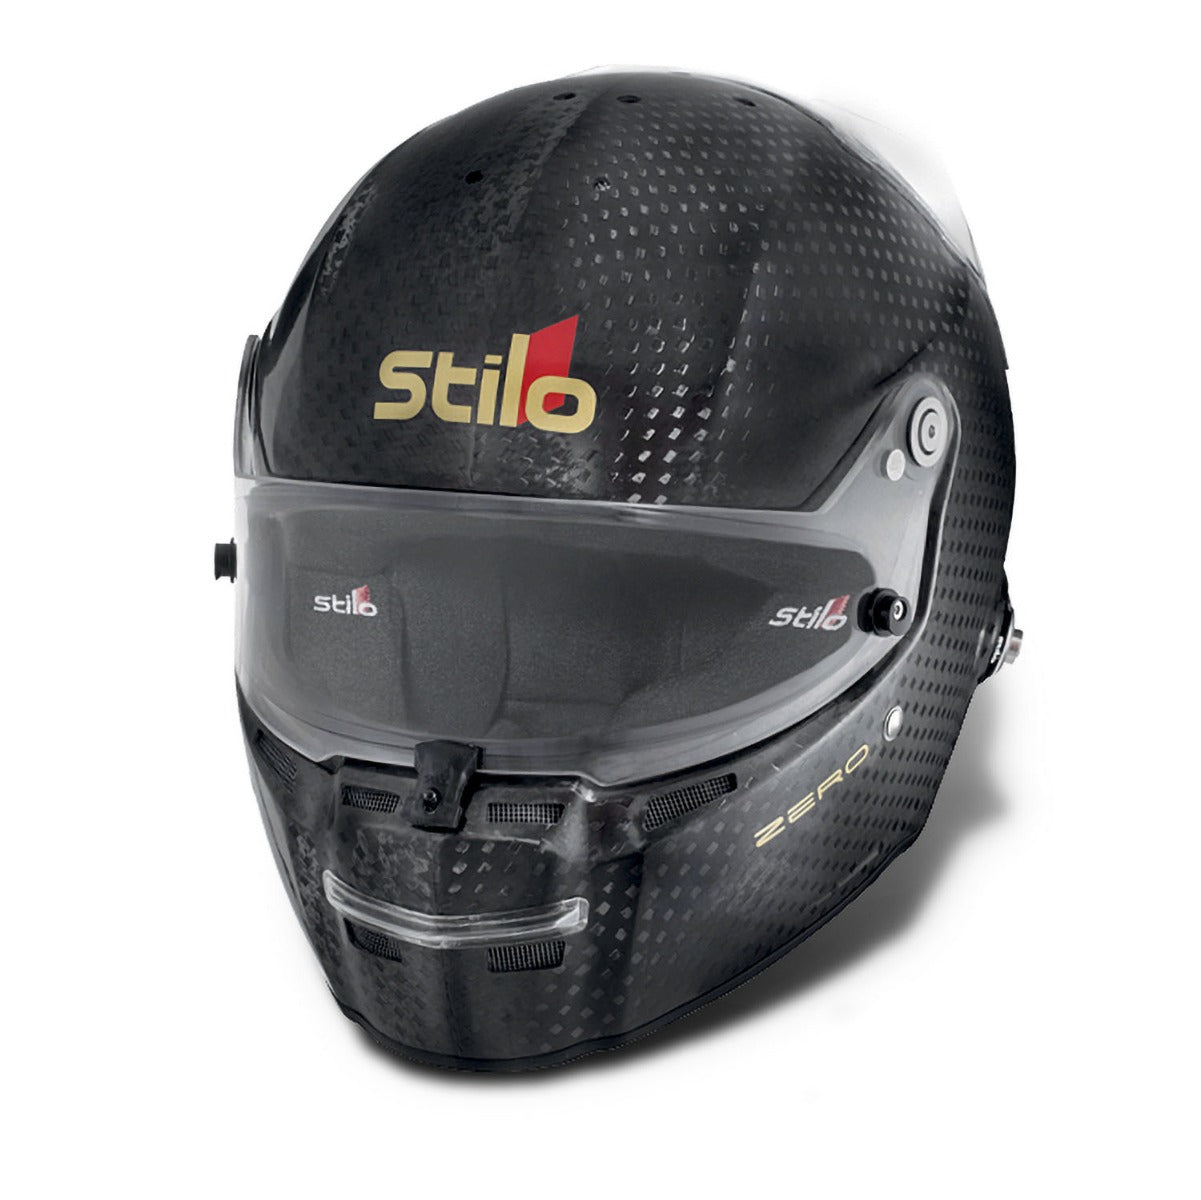 STILO ST5 FN ABP ZERO CARBON FIBER AUTO RACING HELMET IN STOCK AT THE LOWEST PRICES AND LARGEST DISCOUNTS FOR THE BEST DEAL ON STILO ST5 FN ABP ZERO CARBON FIBER AUTO RACING HELMET PROFILE IMAGE